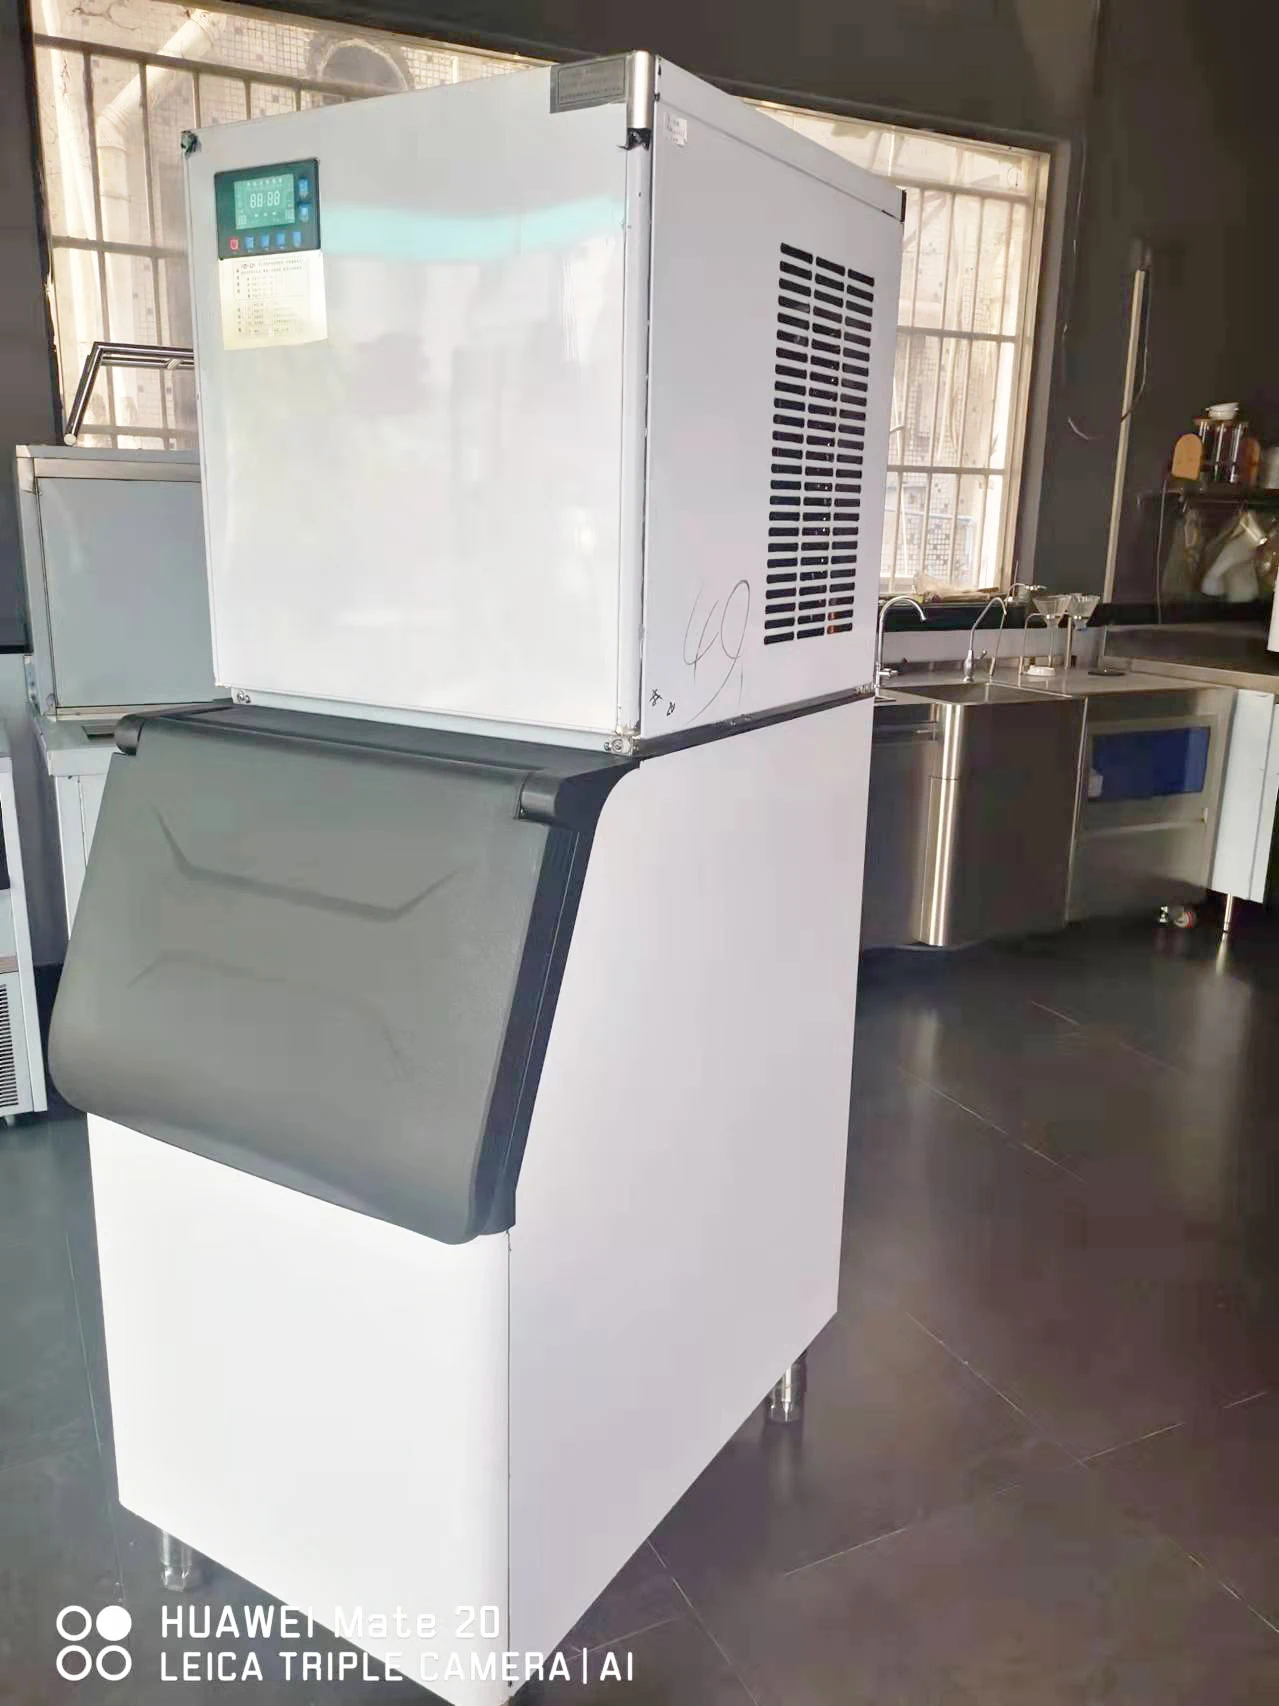 Portable Ice Cube Maker Making Machine Commercial Price For Tanzania